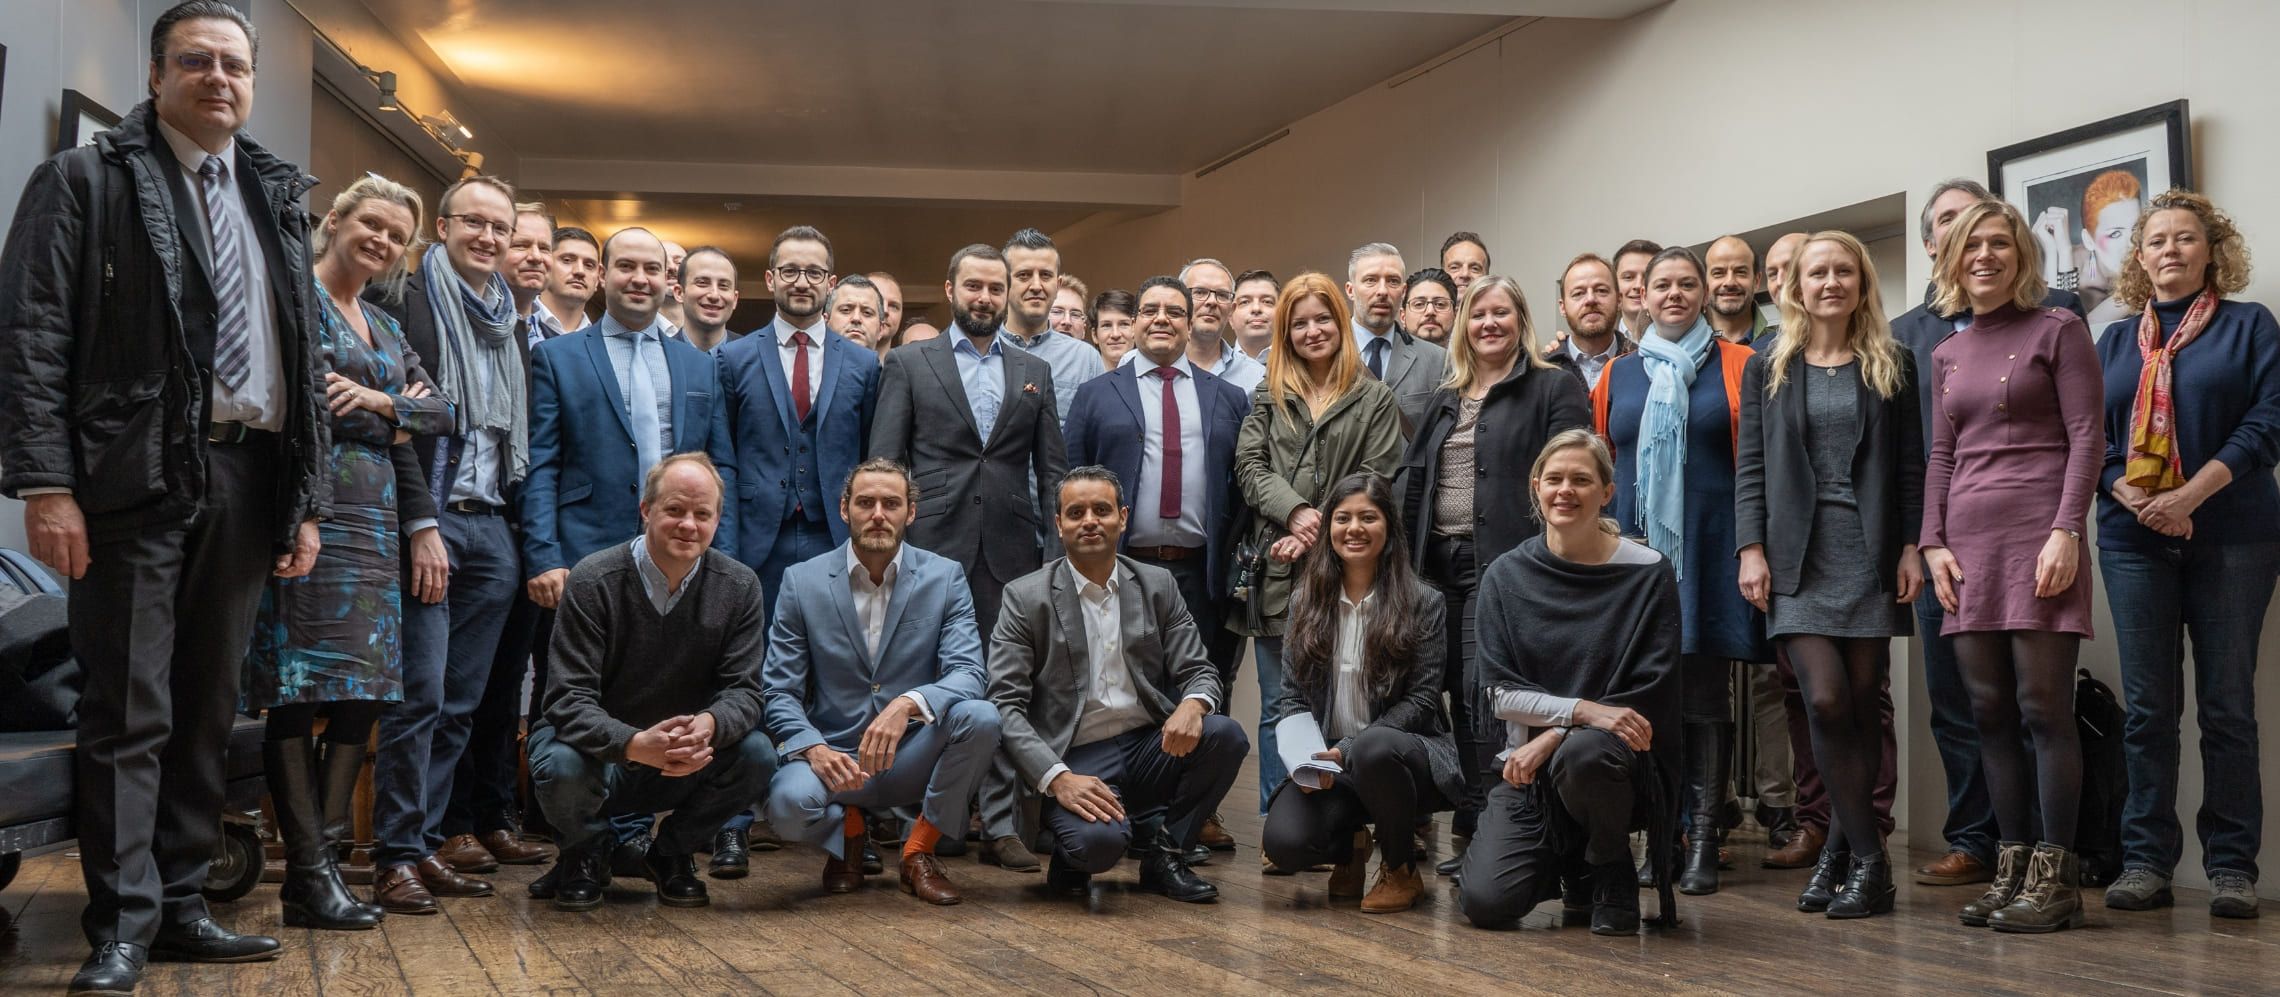 Photo for: 2019 London Wine Competition Judges